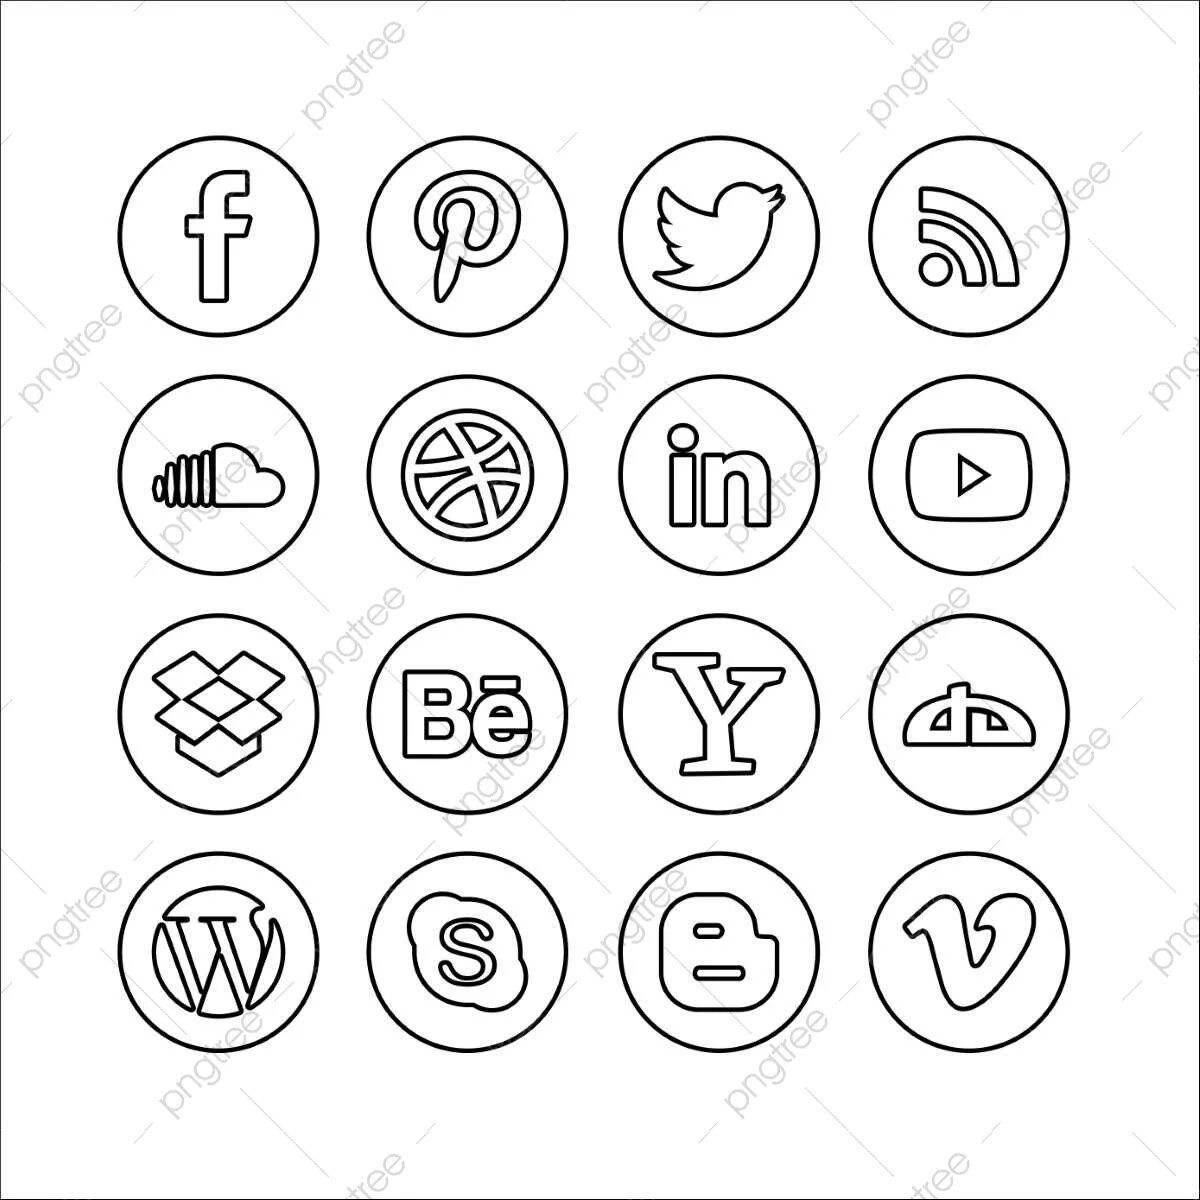 Fun coloring pages with social media logos